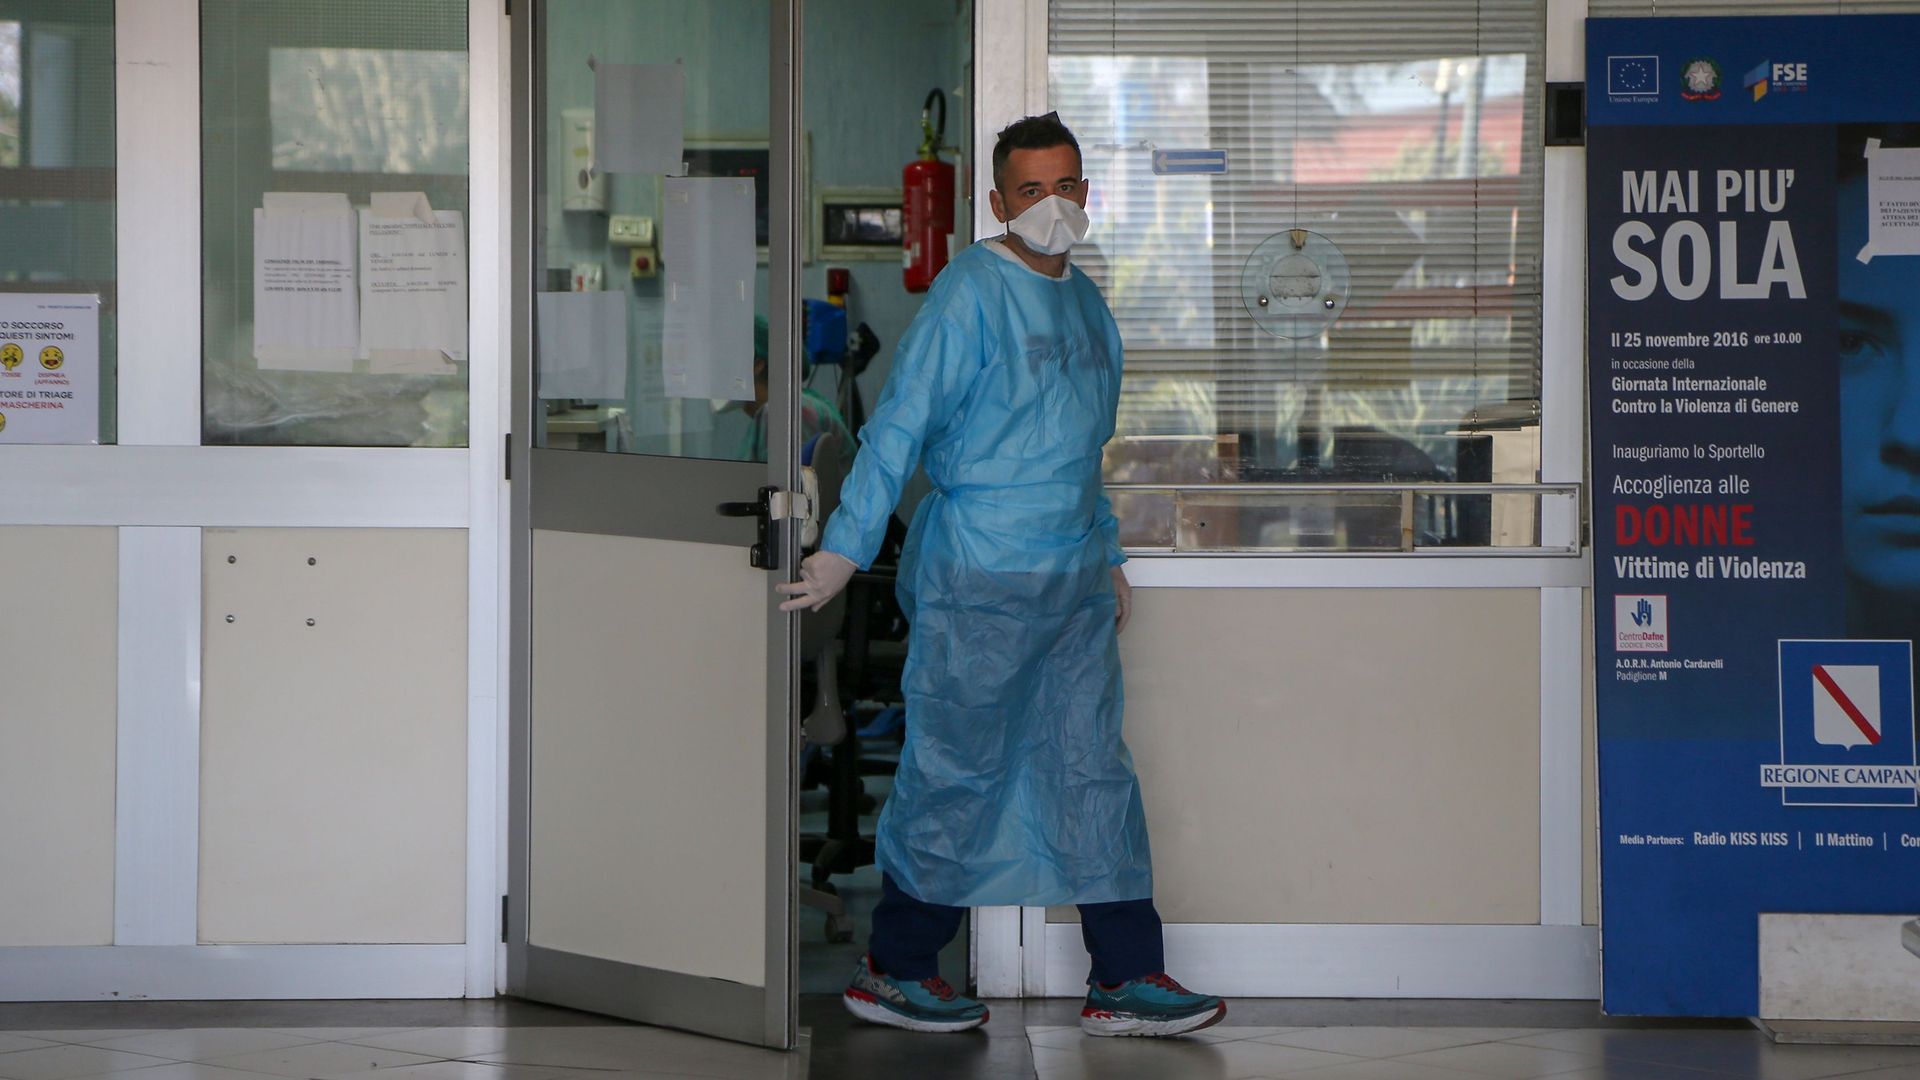 A hospital worker opens a door and leaves a room in an Italian hospital.